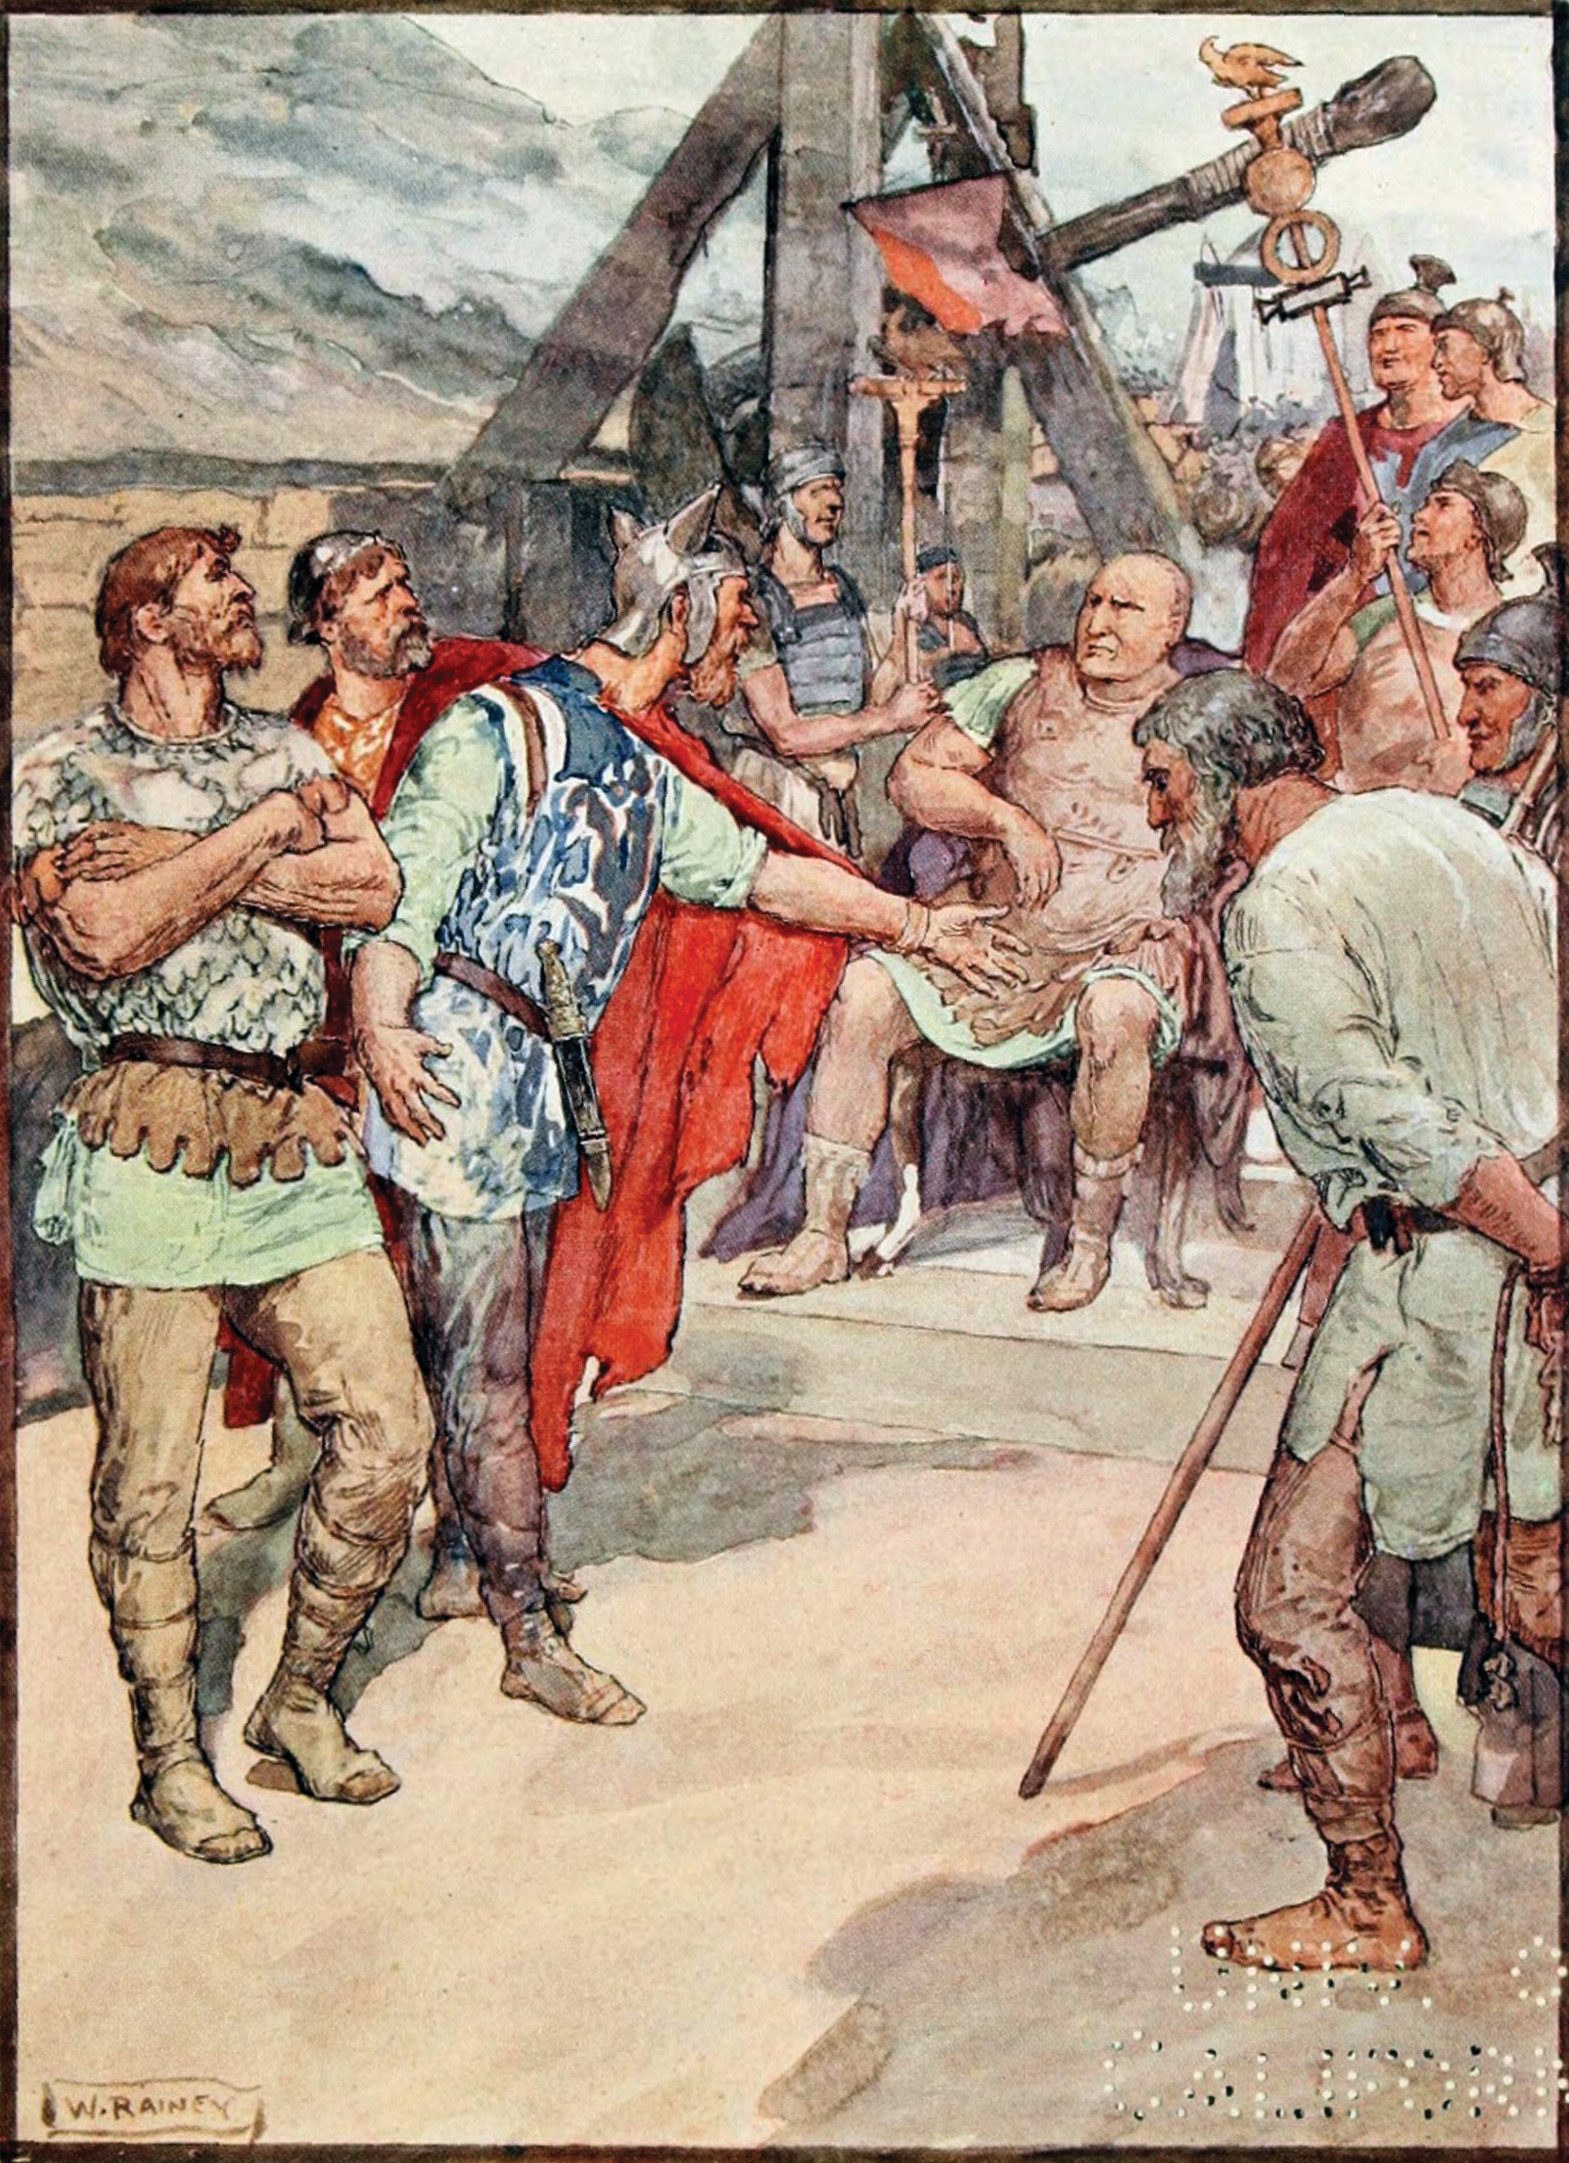 Marius meets with emissaries of the Celto-German tribes in the Rhone Valley. The wily Roman general urged his soldiers to observe their tactics and methods as part of their preparation for battle.